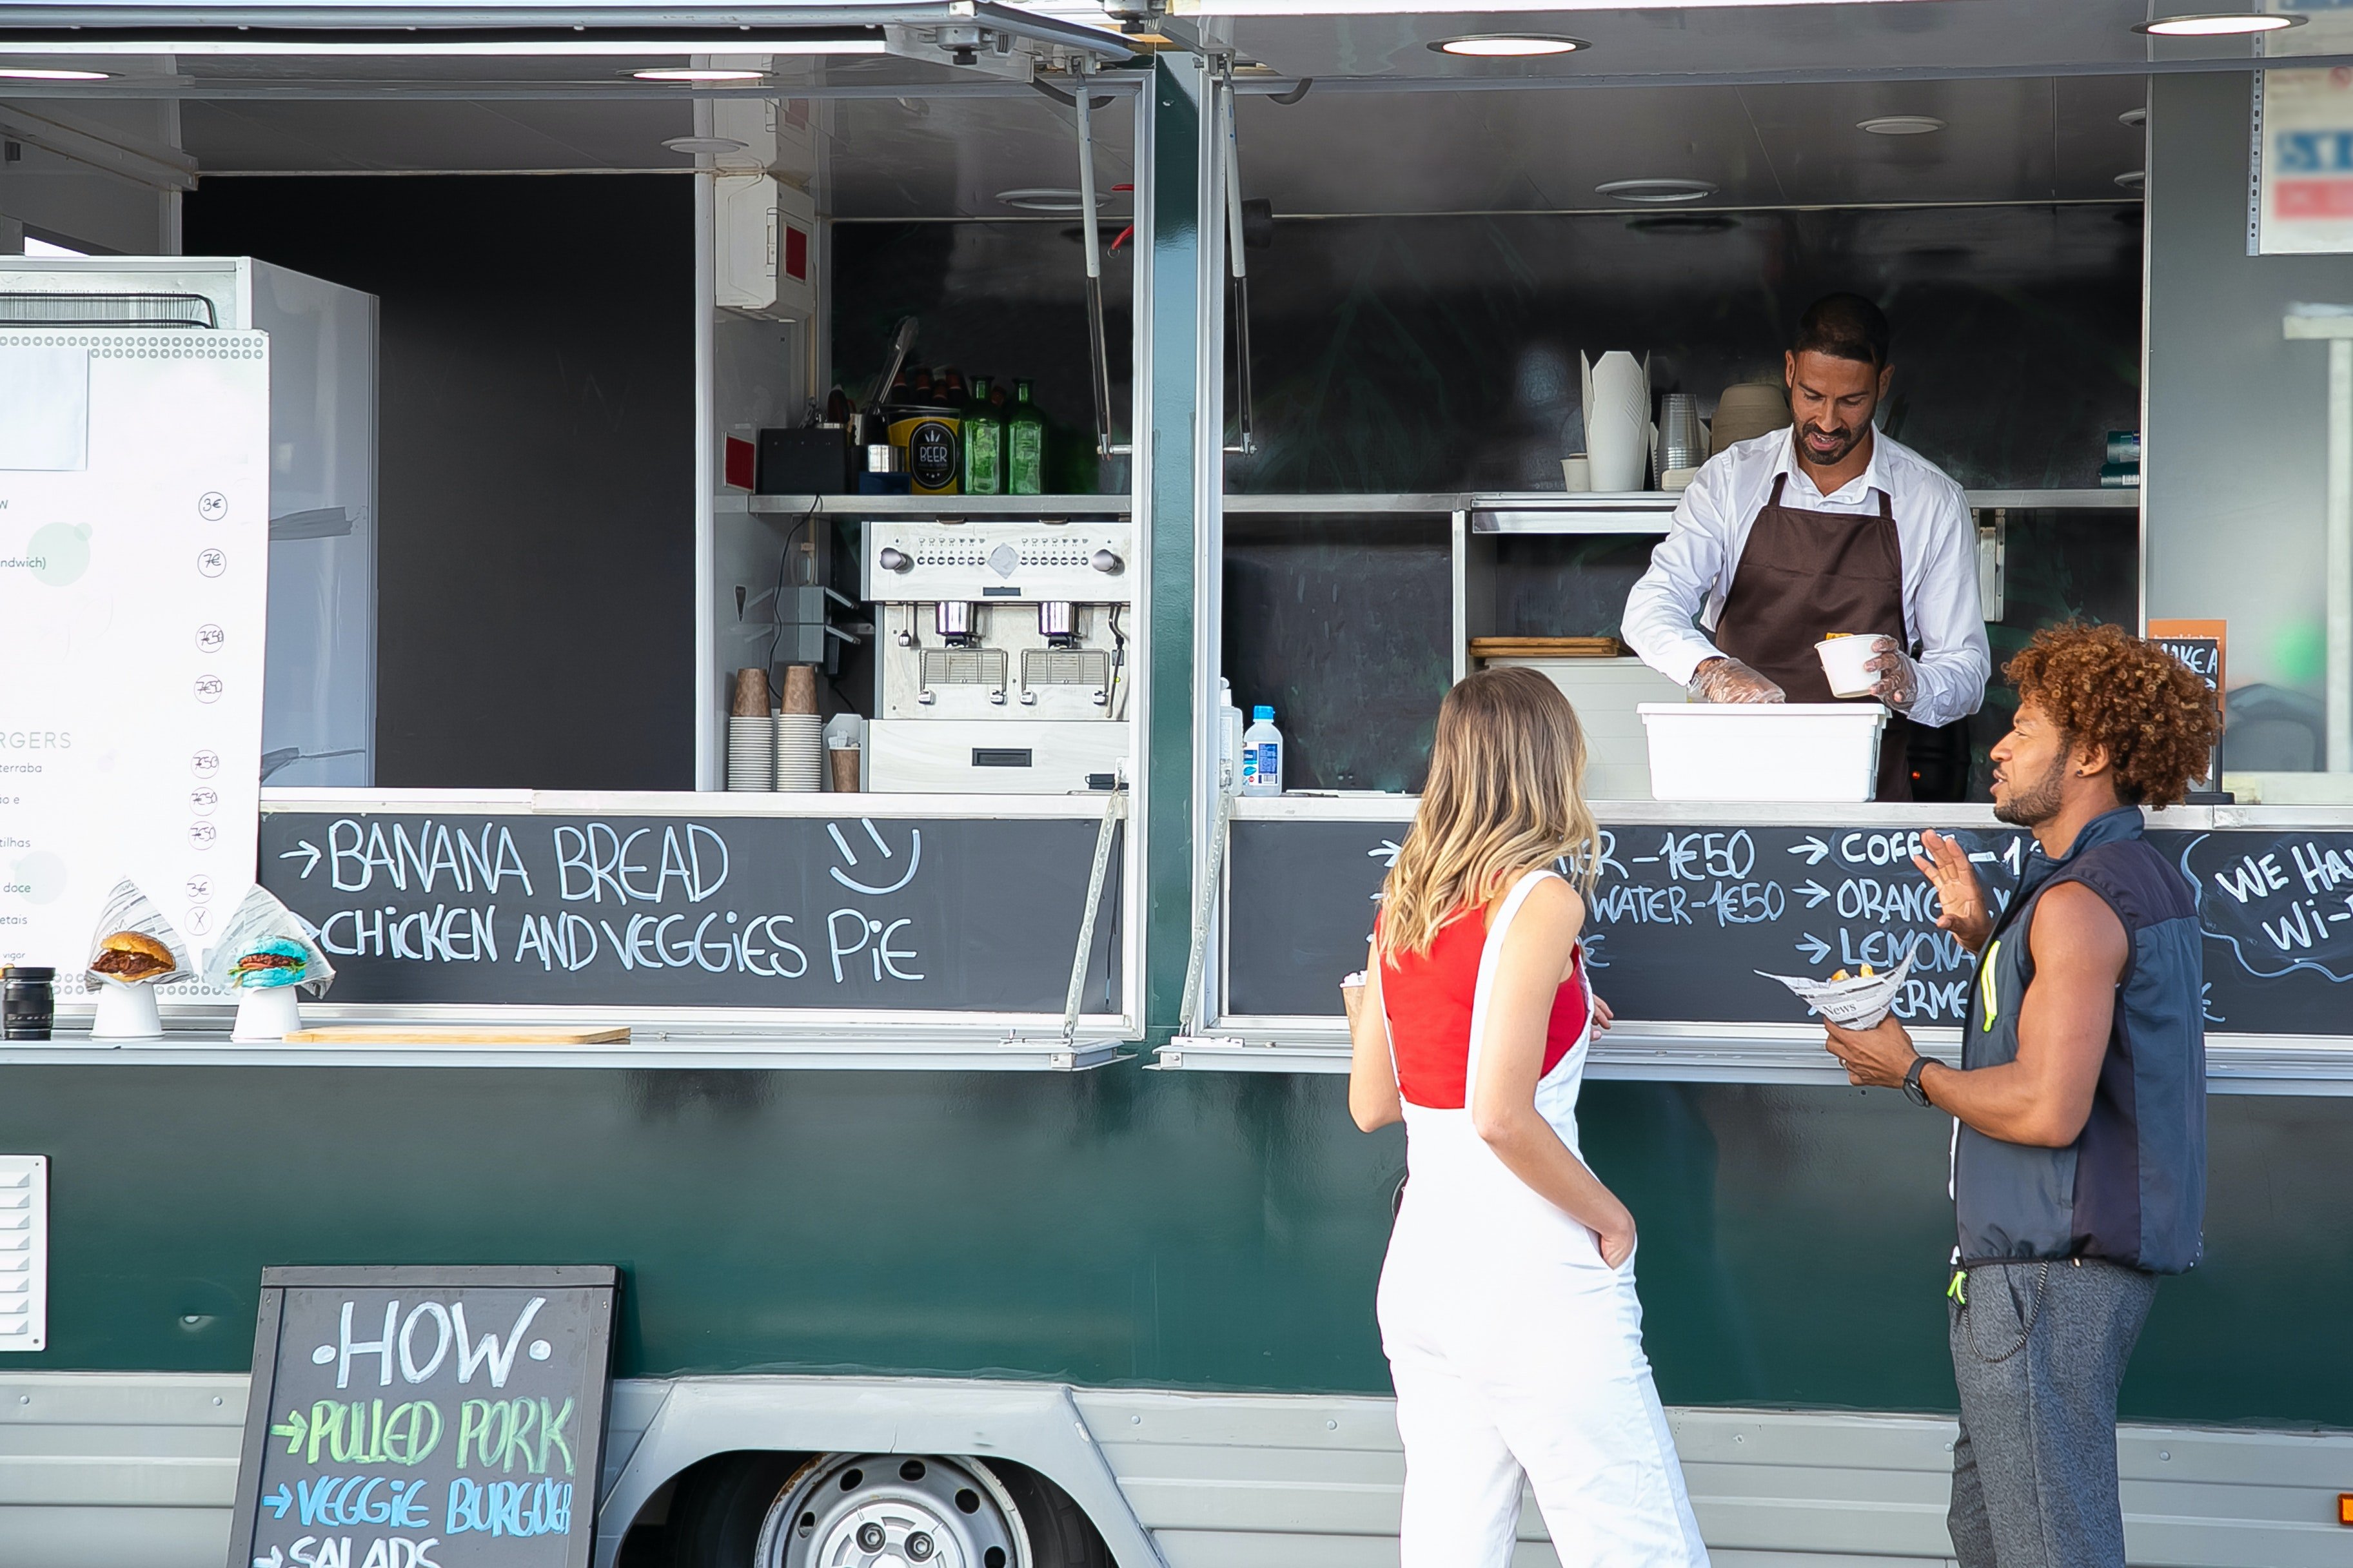 Mark and Sally opened a fleet of food trucks. | Source: Pexels